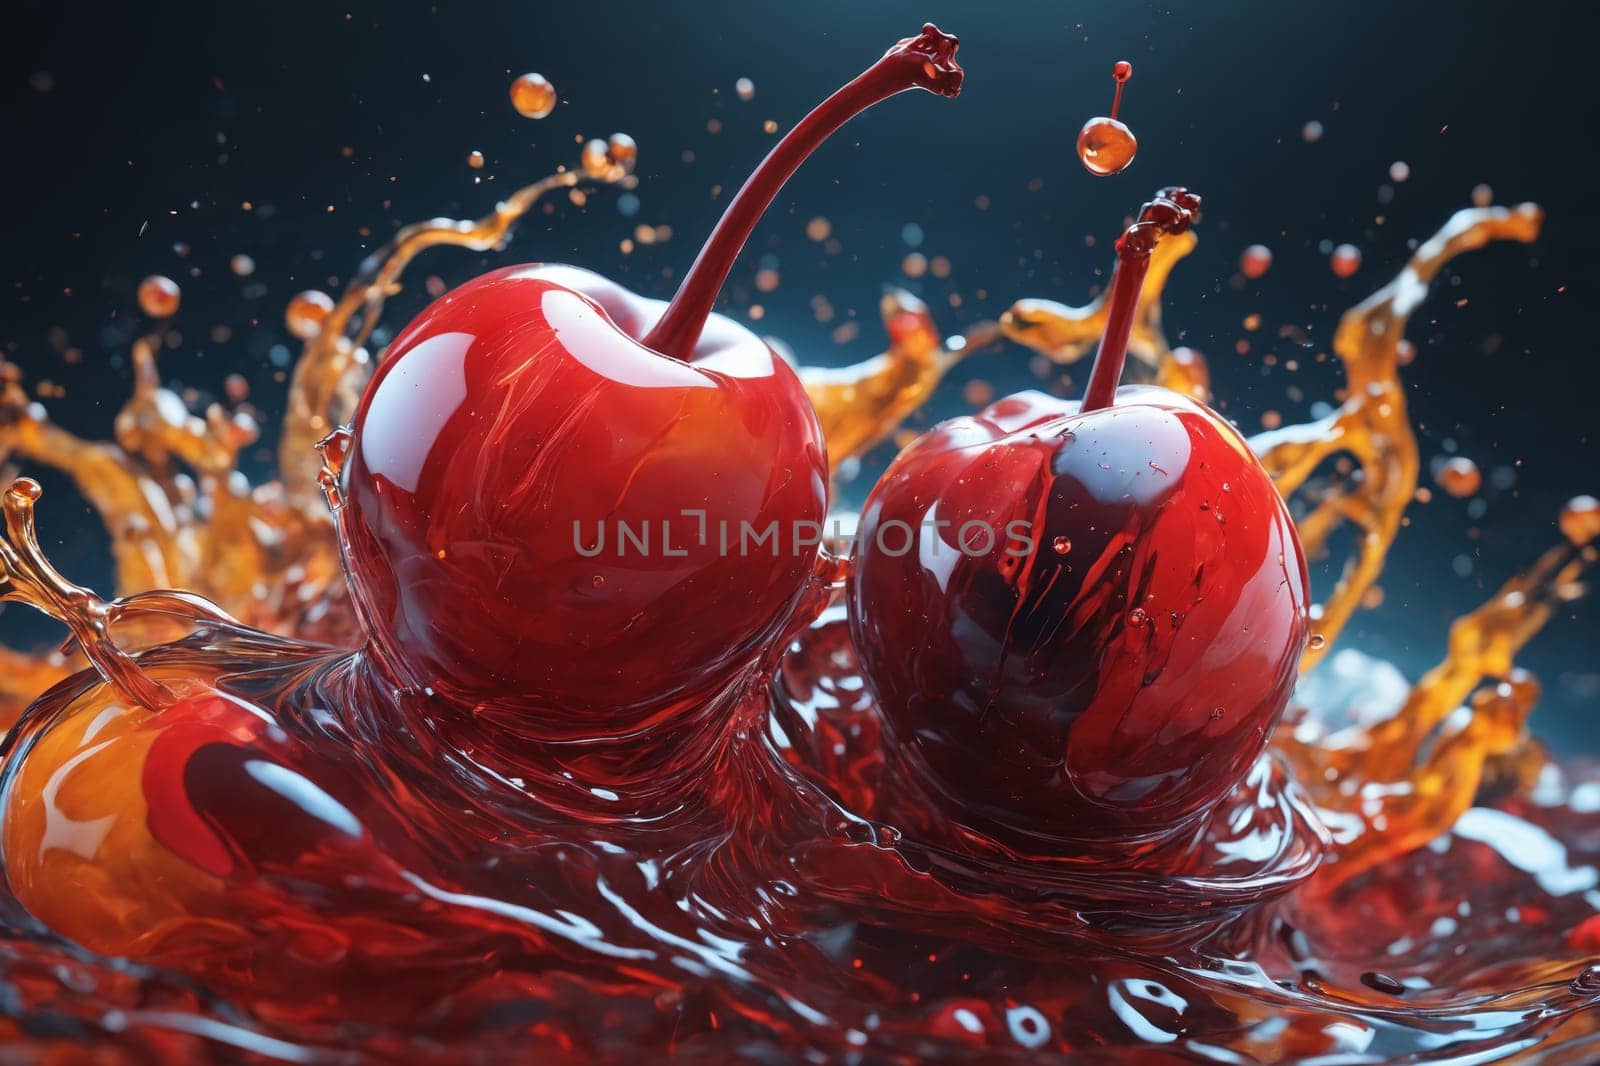 The moment cherries hit a water-filled bowl, creating a lively dance with splashing oranges.